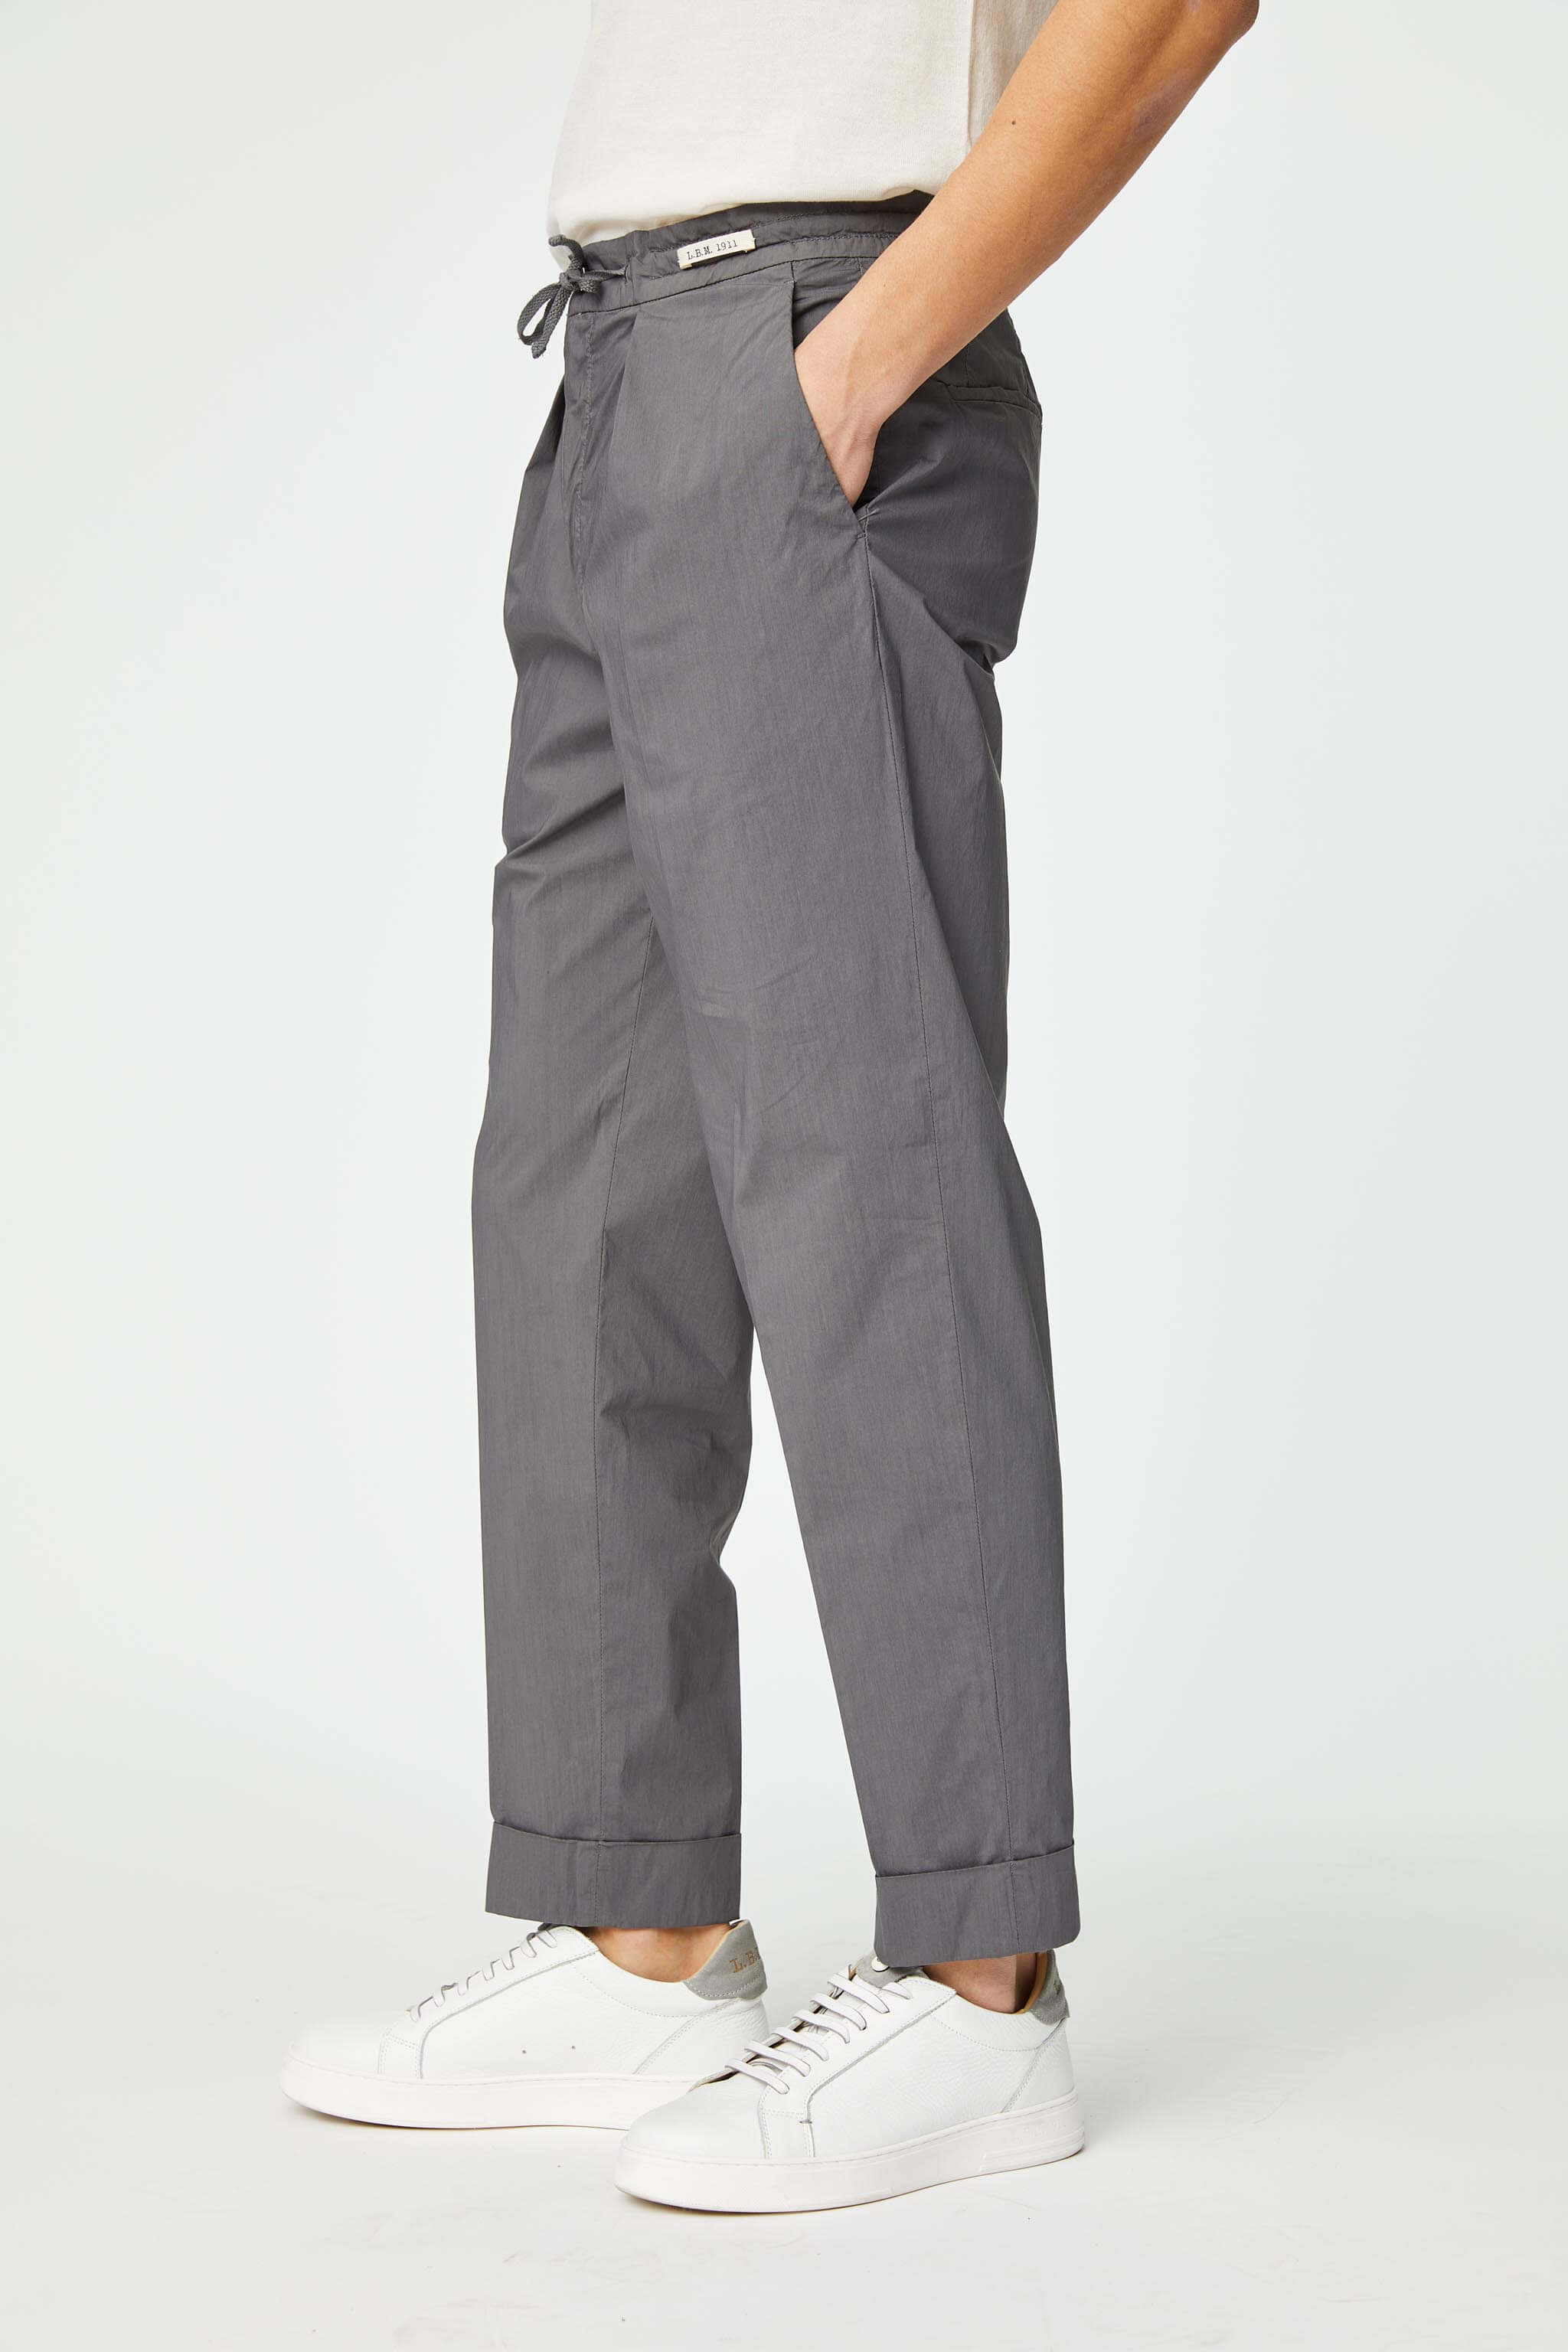 Garment-dyed LESTER pants in gray